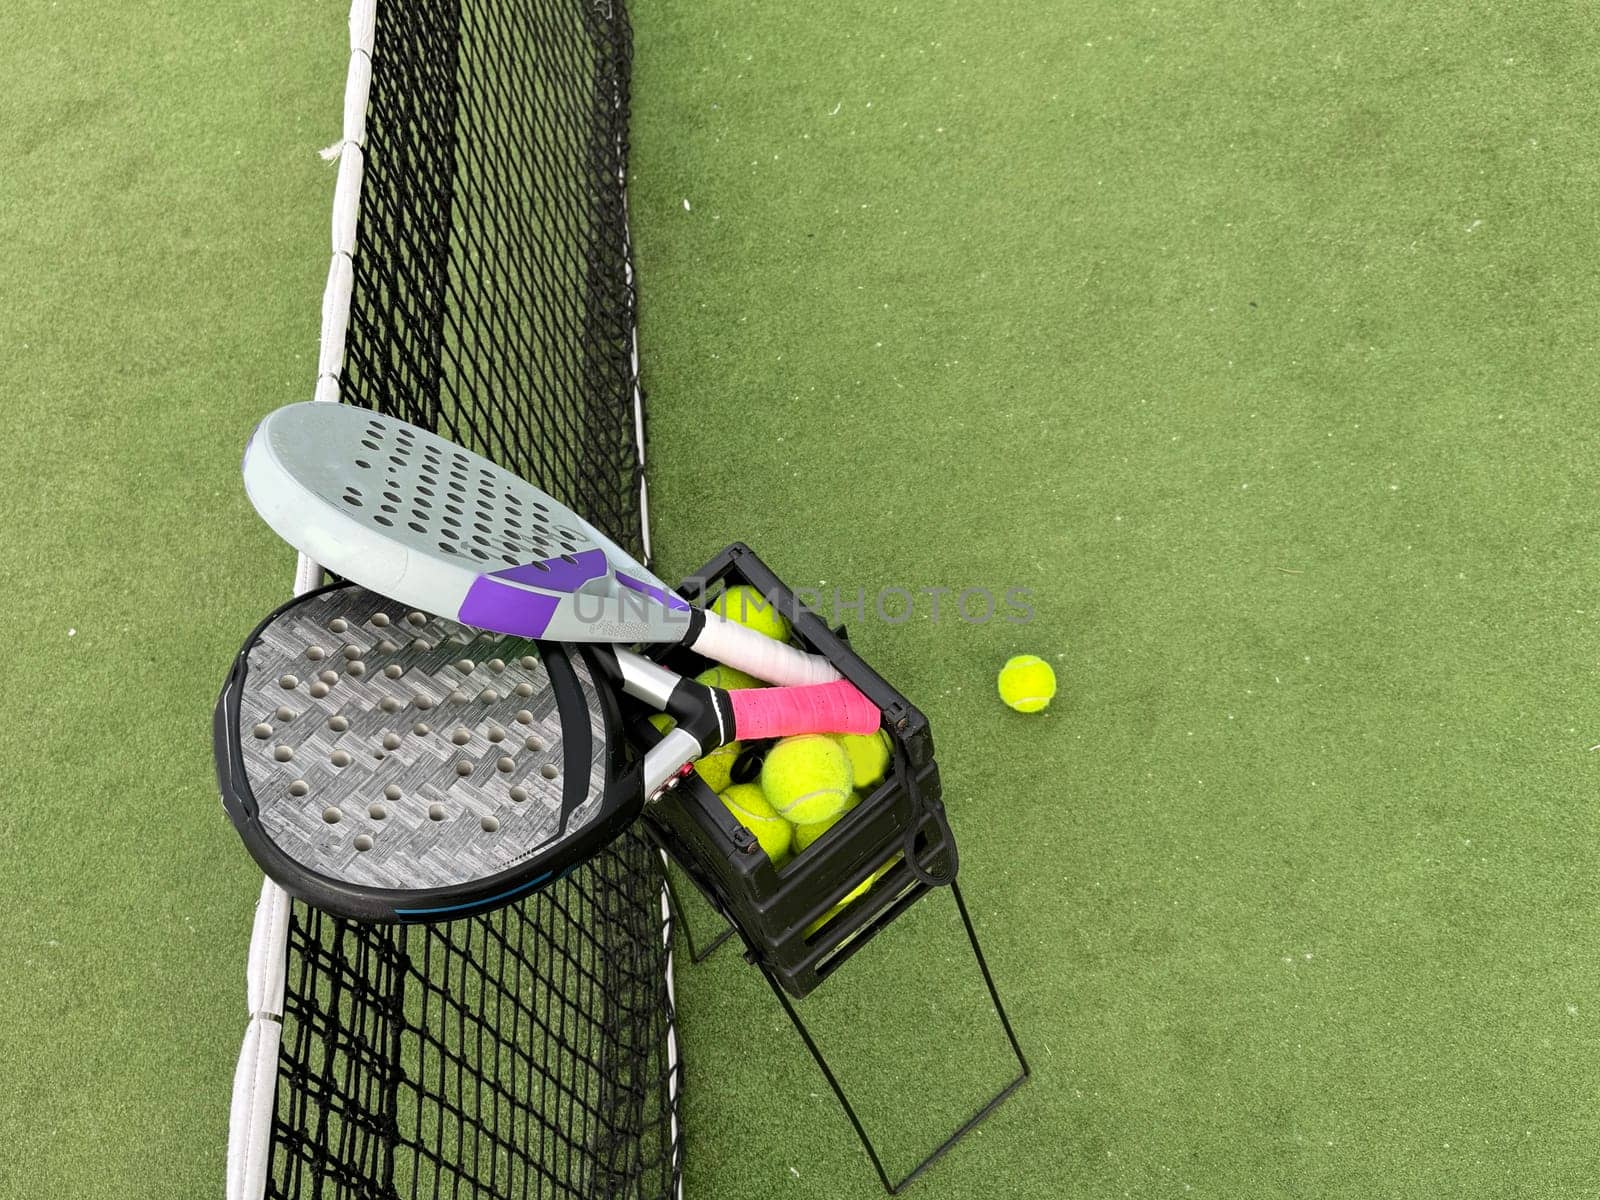 Paddle tennis racket and ball. High quality photo